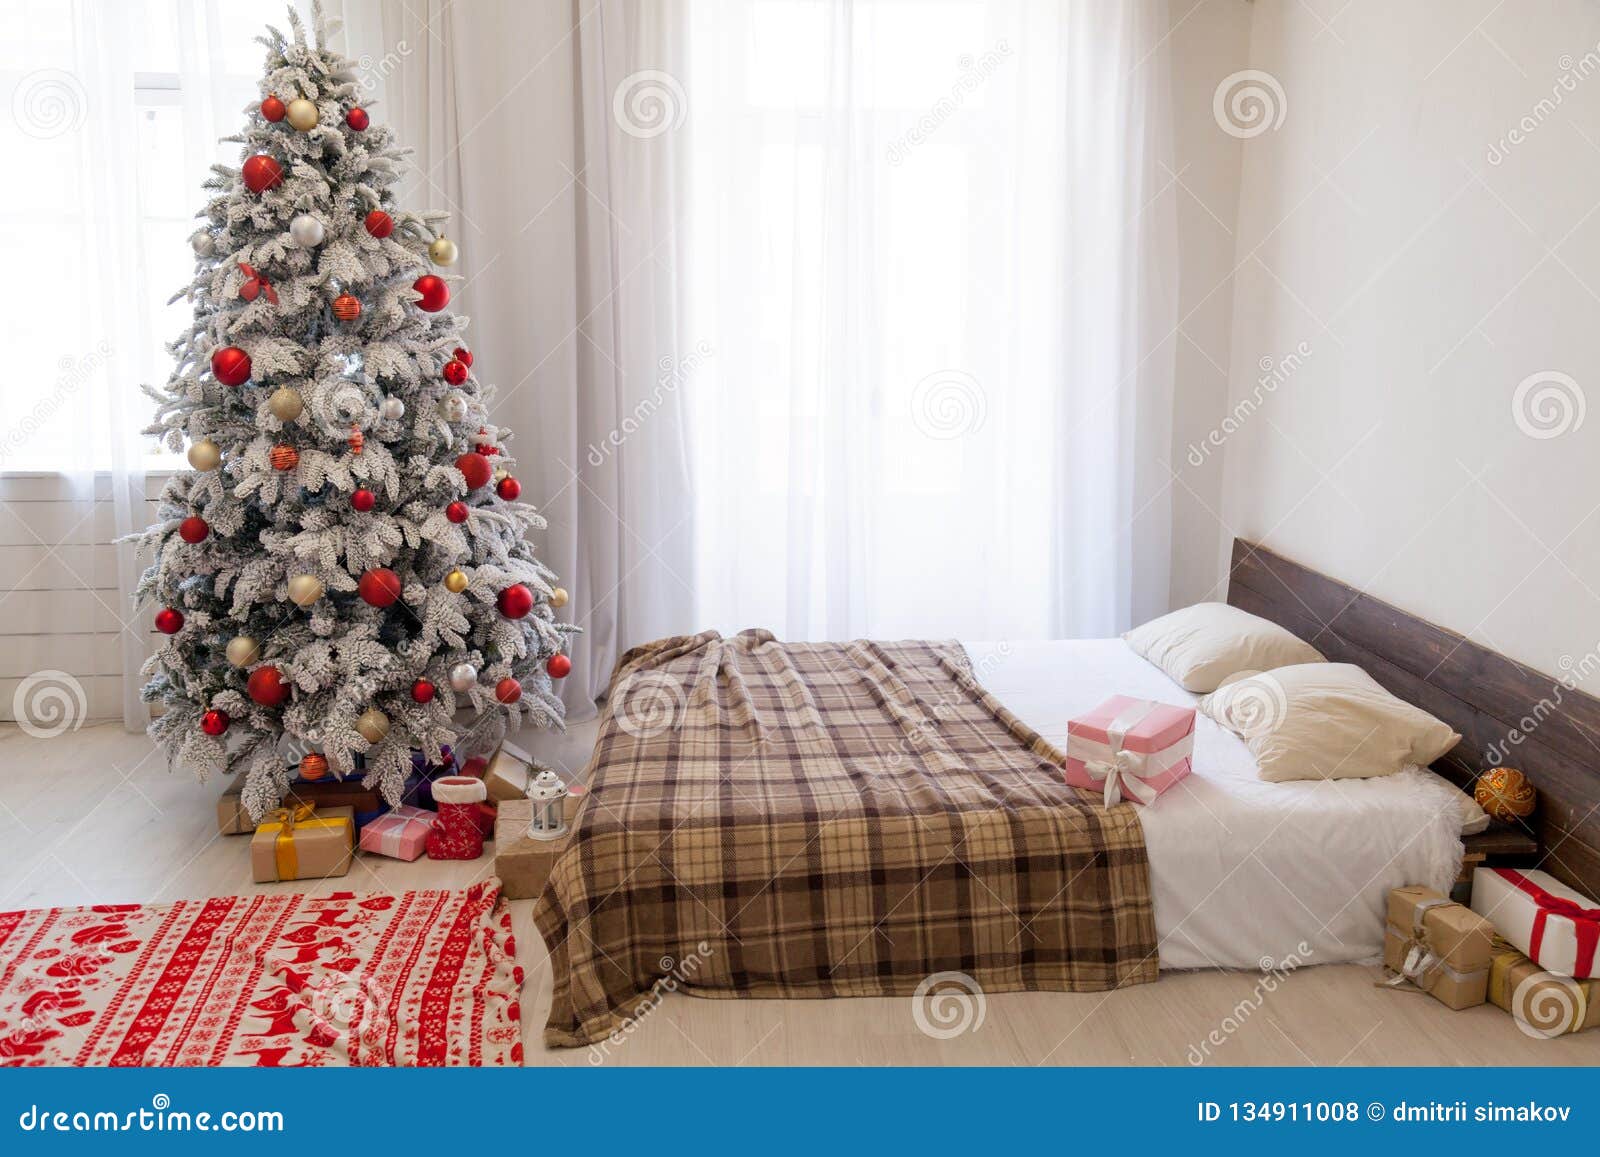 Winter Christmas Background Bed Bedroom Tree Holiday Gifts New Year ...